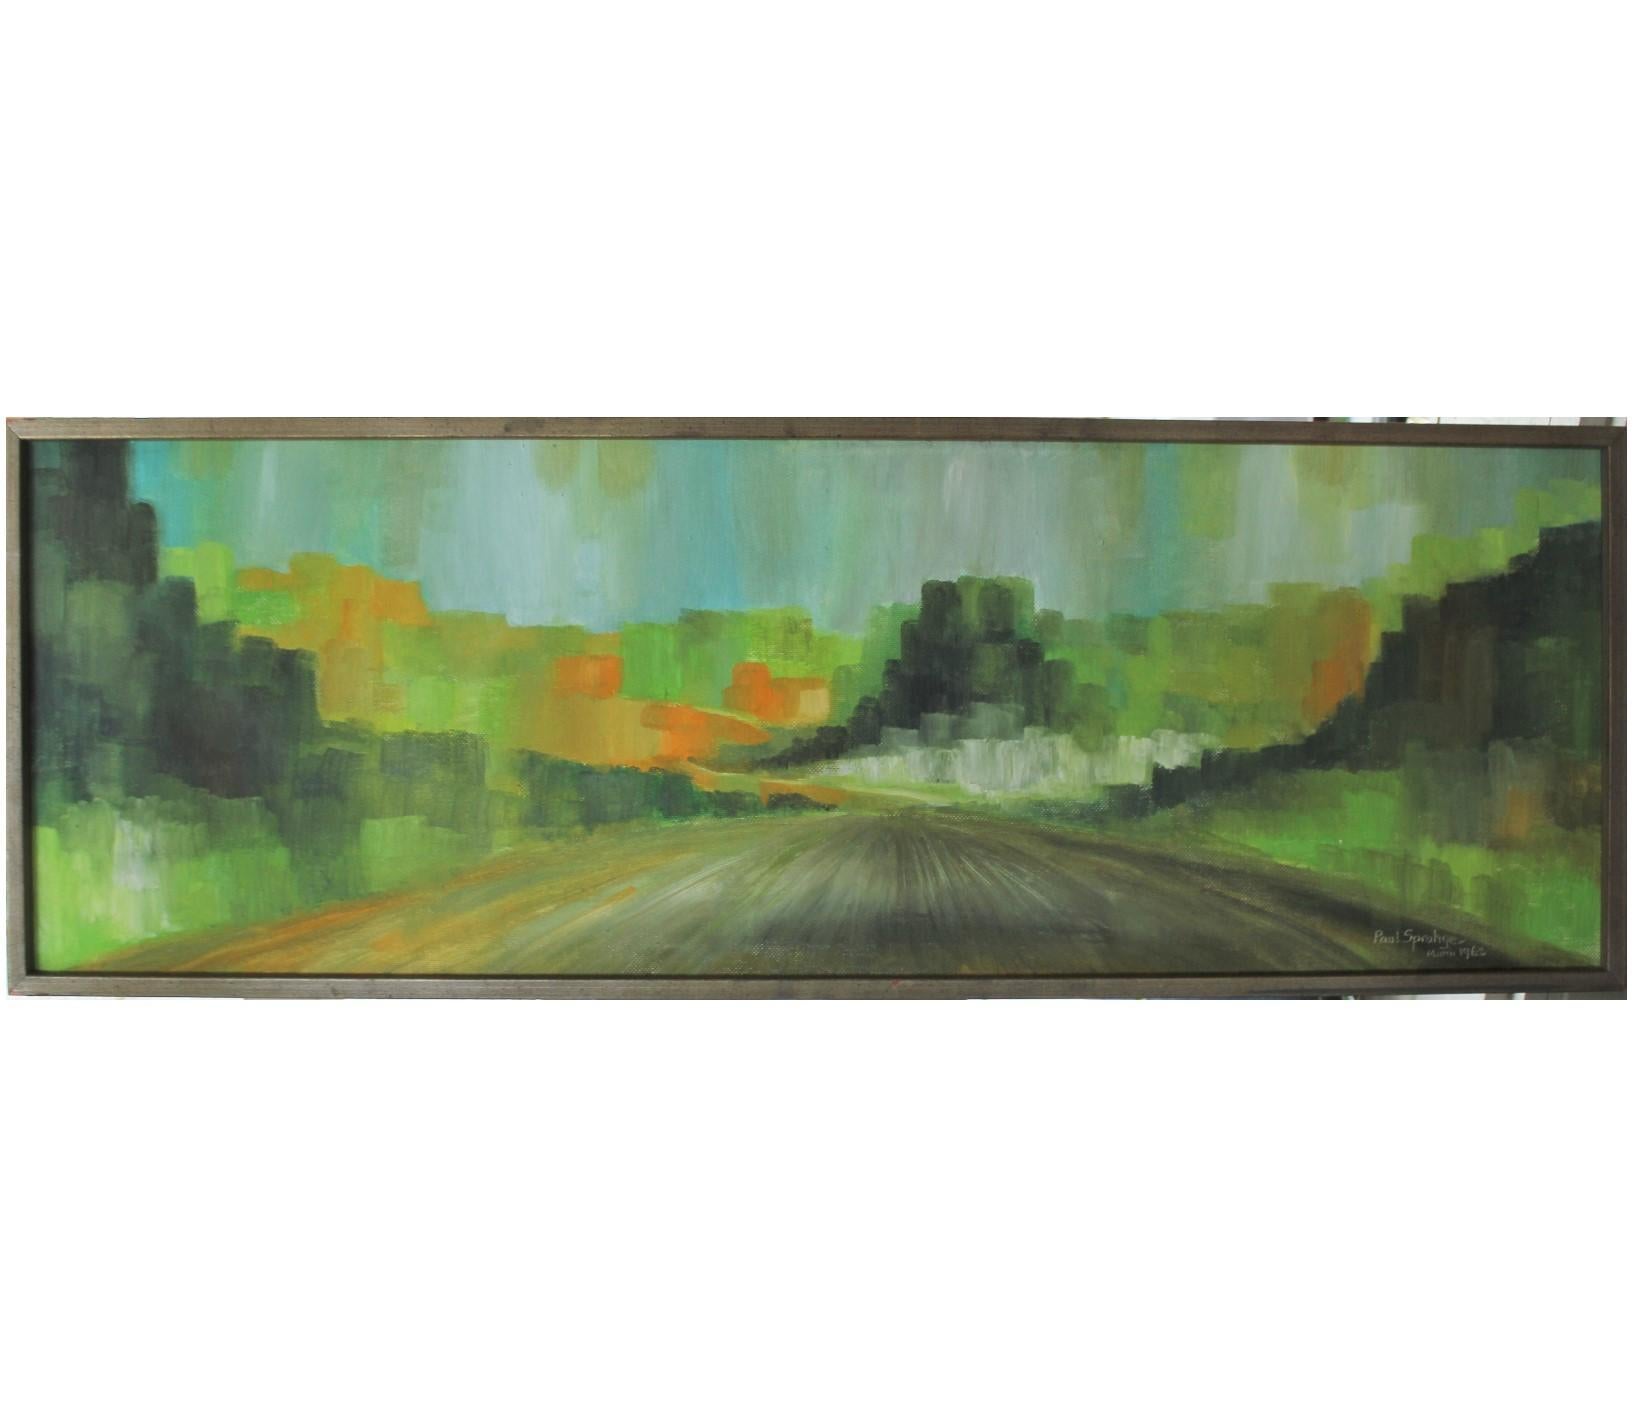 Paul Sprohge Landscape Painting - "Speeding" Impressionist Natural Tonal Painting 